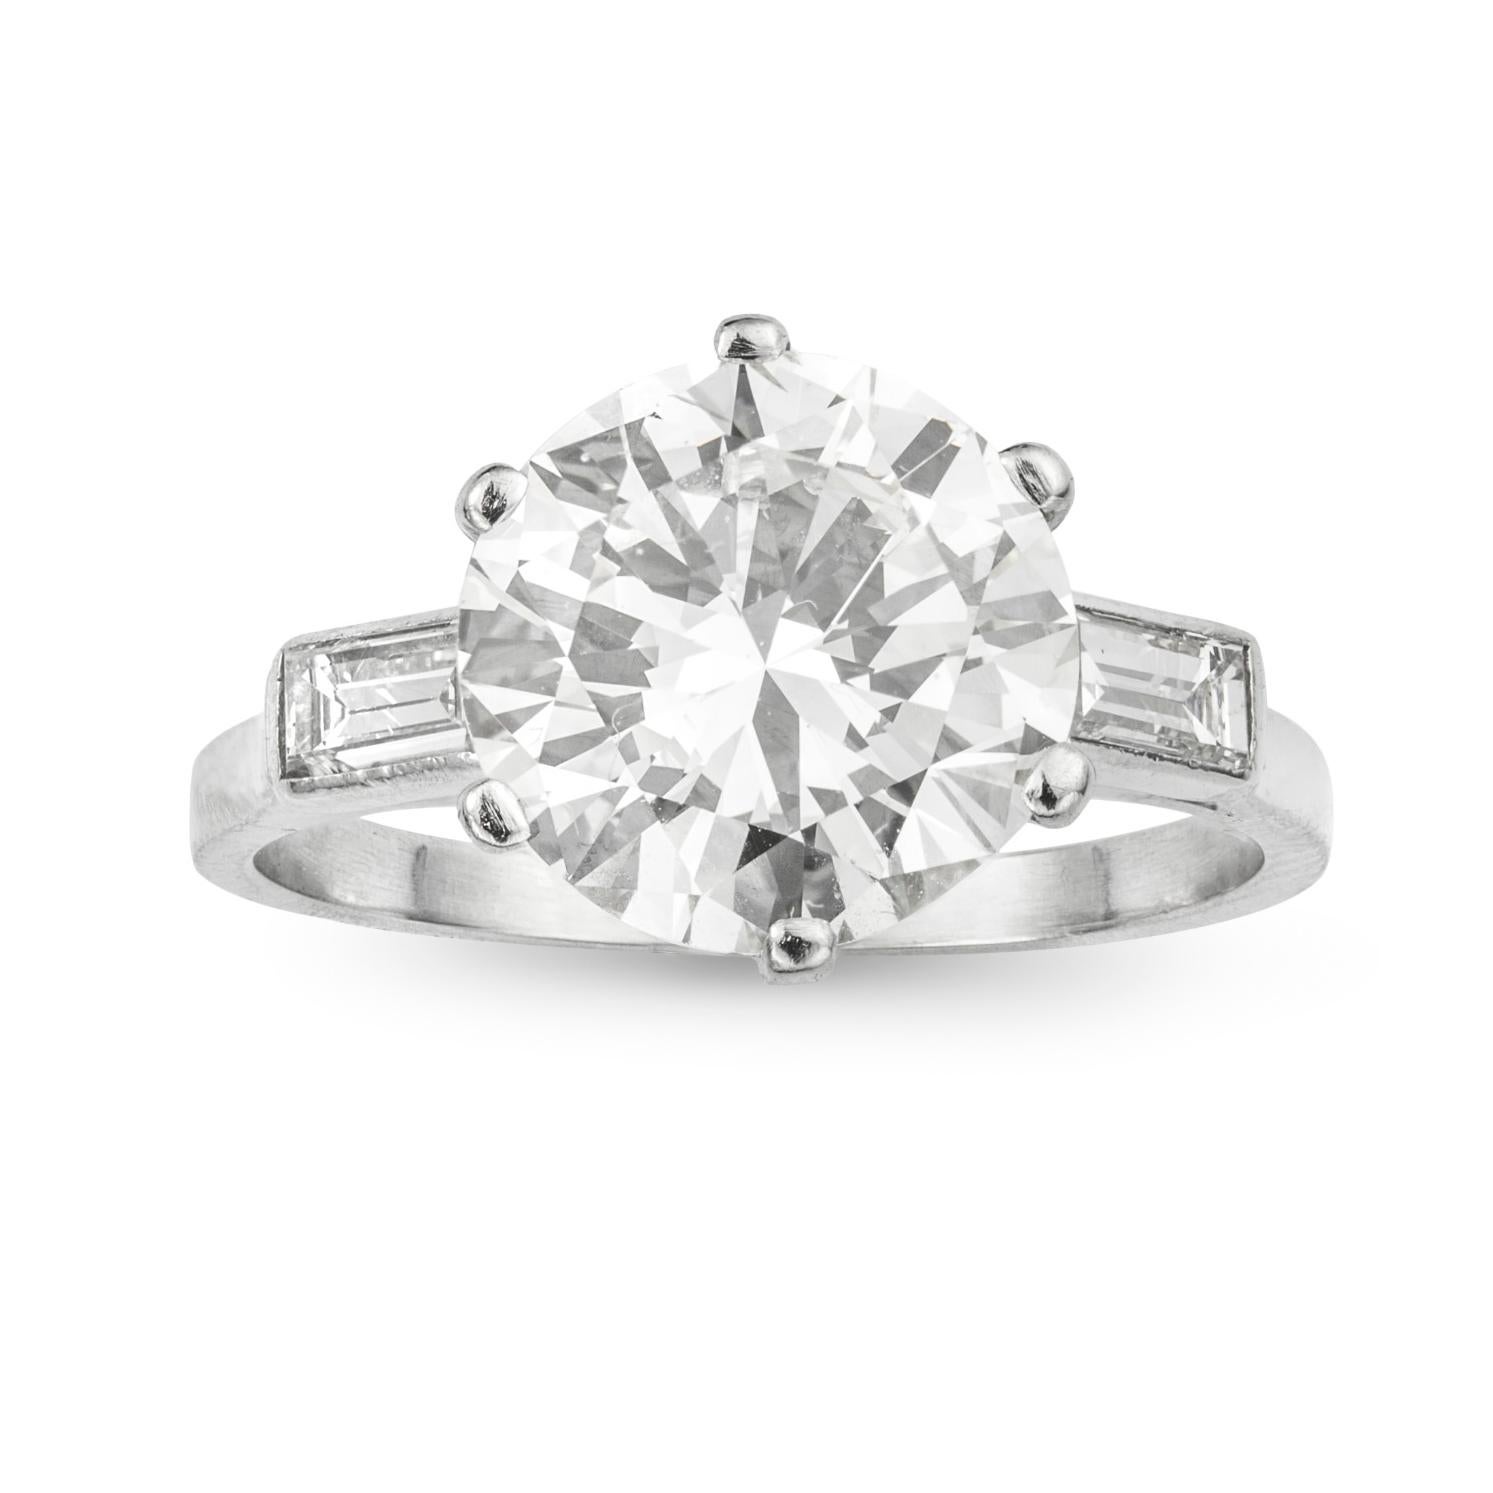 
A single stone diamond ring, the round brilliant-cut diamond weighing 3.44 carats, accompanied by GIA report stating to be of J colour and SI1 clarity, six claw-set in platinum mount between two baguette-cut diamonds estimated to weigh a further